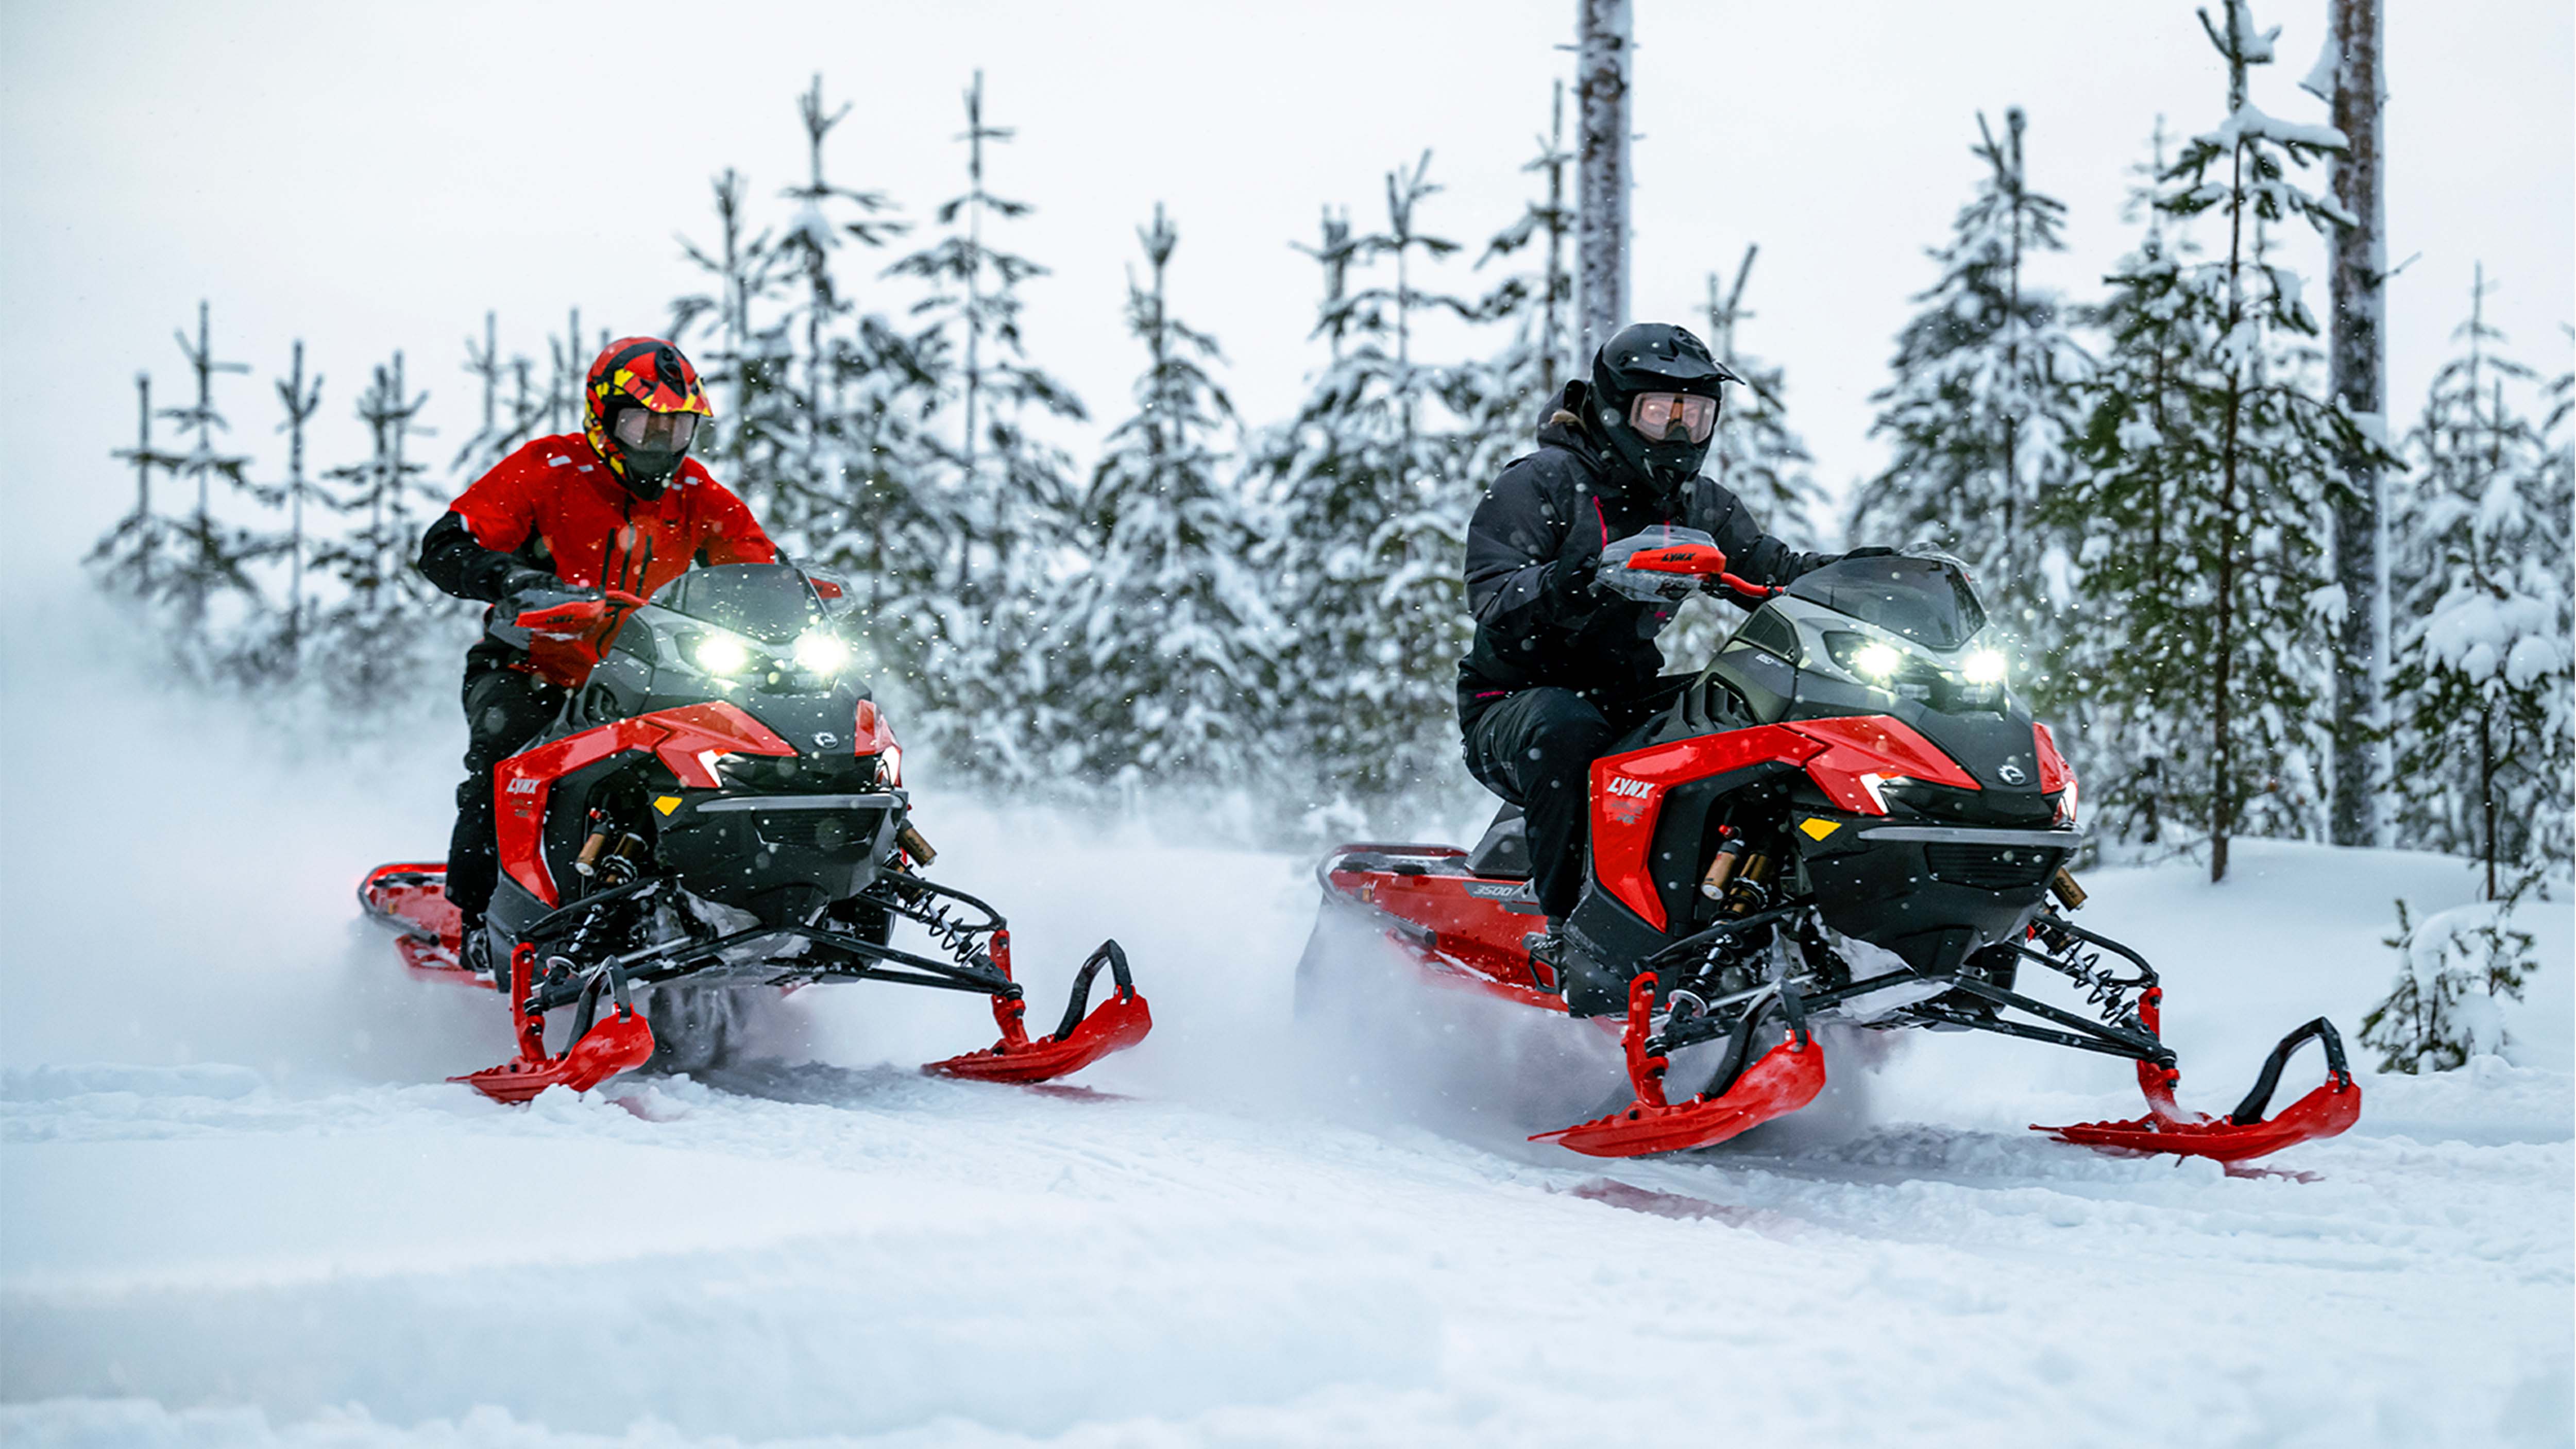 Two Rave RE snowmobiles accelarating on trail